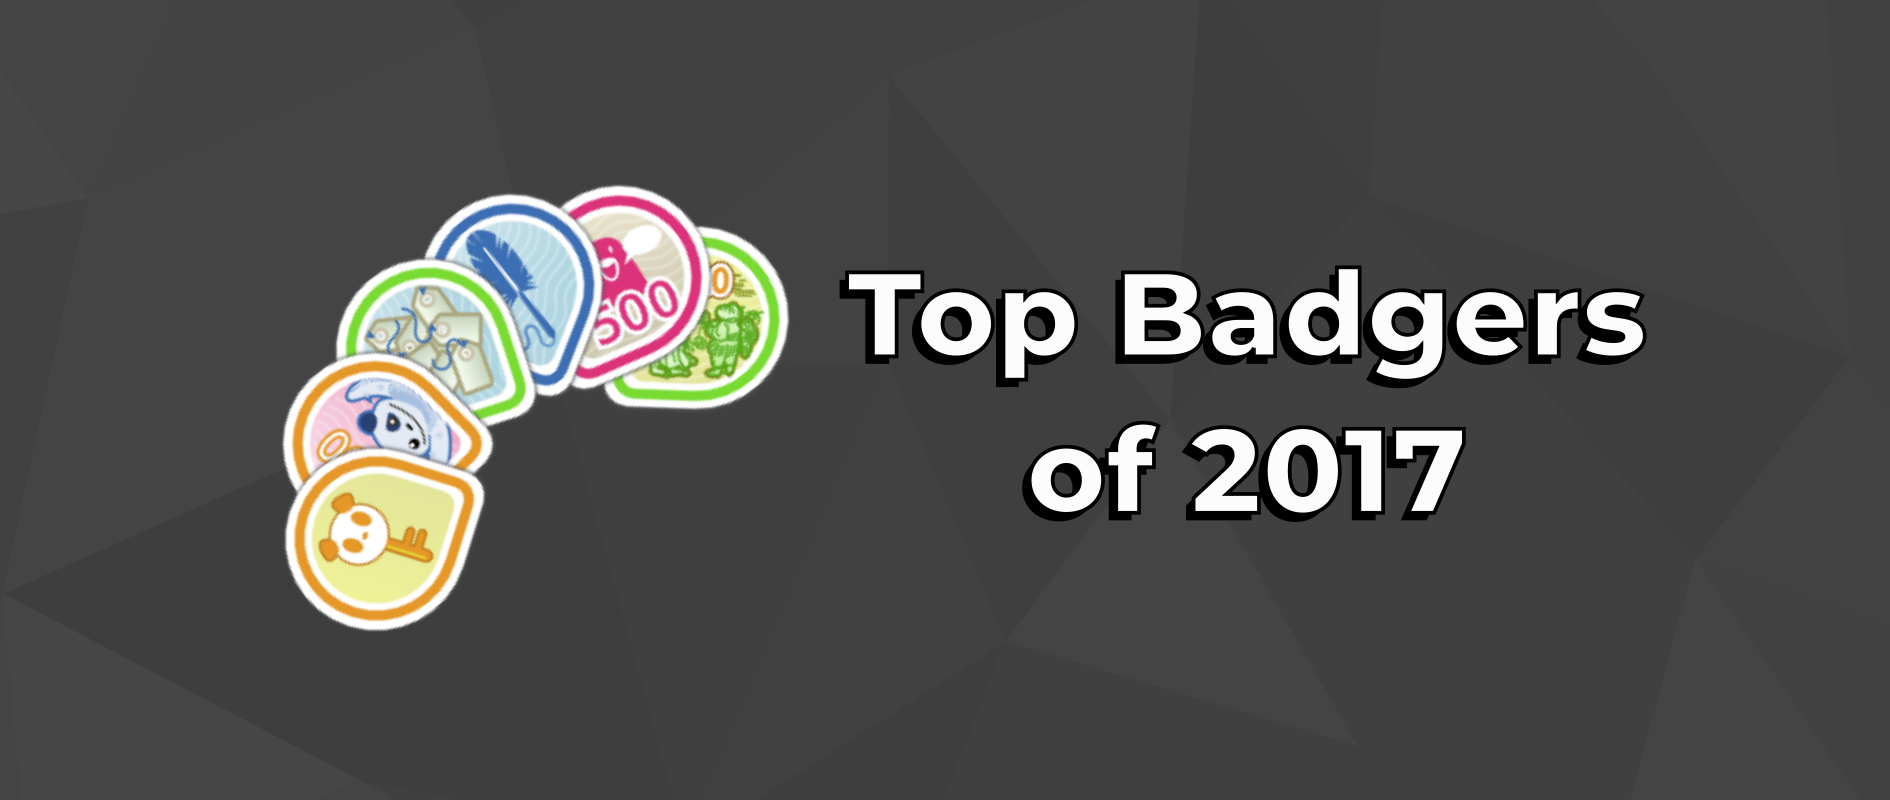 Top Badgers of 2017 - Who earned the most badges in the Fedora Project community during 2017?